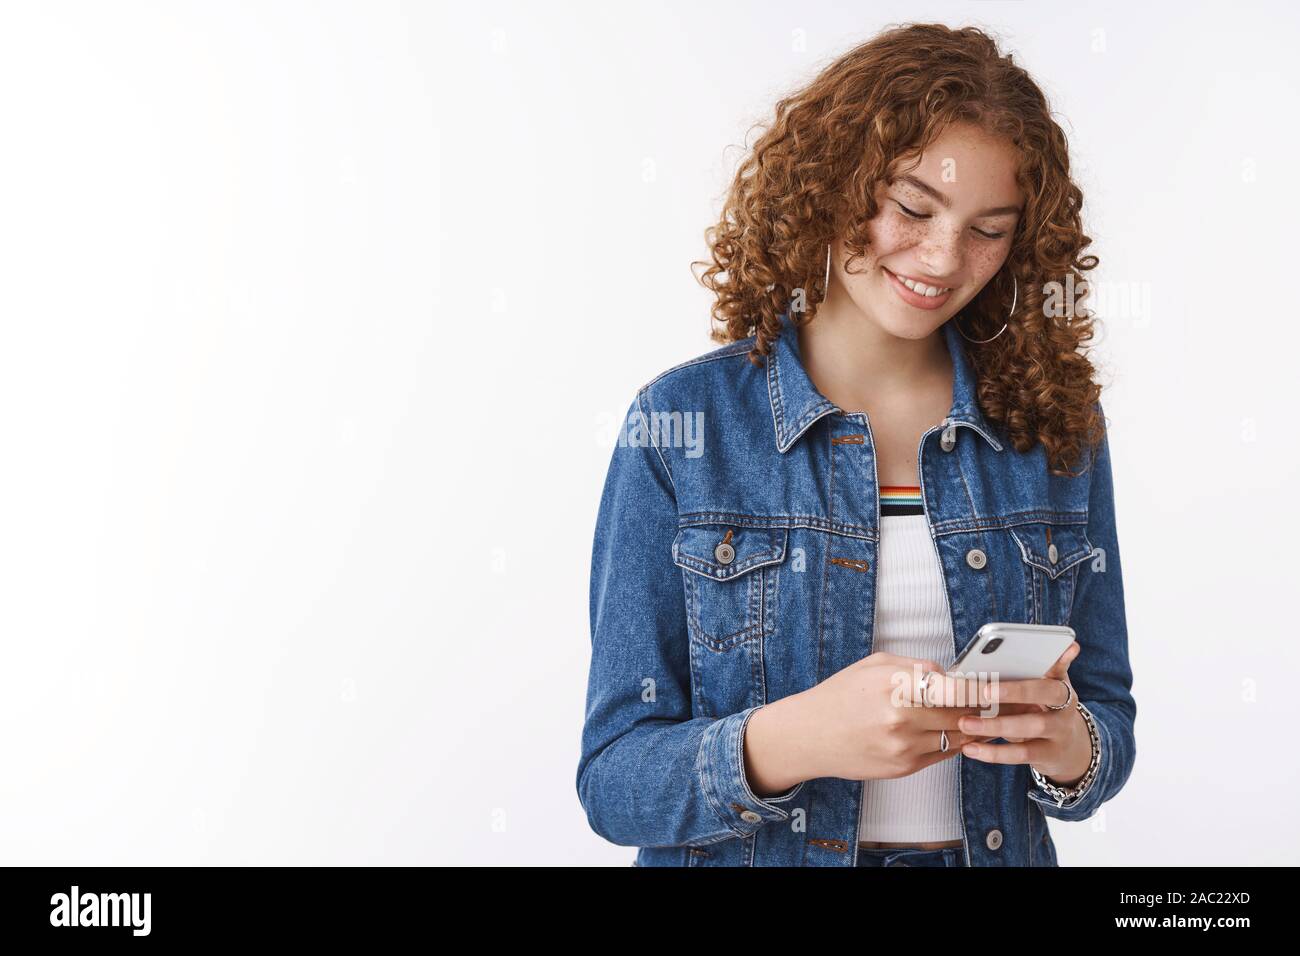 Premium Photo  Happy outgoing stylish ginger adolescent girl curly-haired  pimples holding smartphone playing phone game use funny app look you  devious joyfully smiling messaging talking you same time